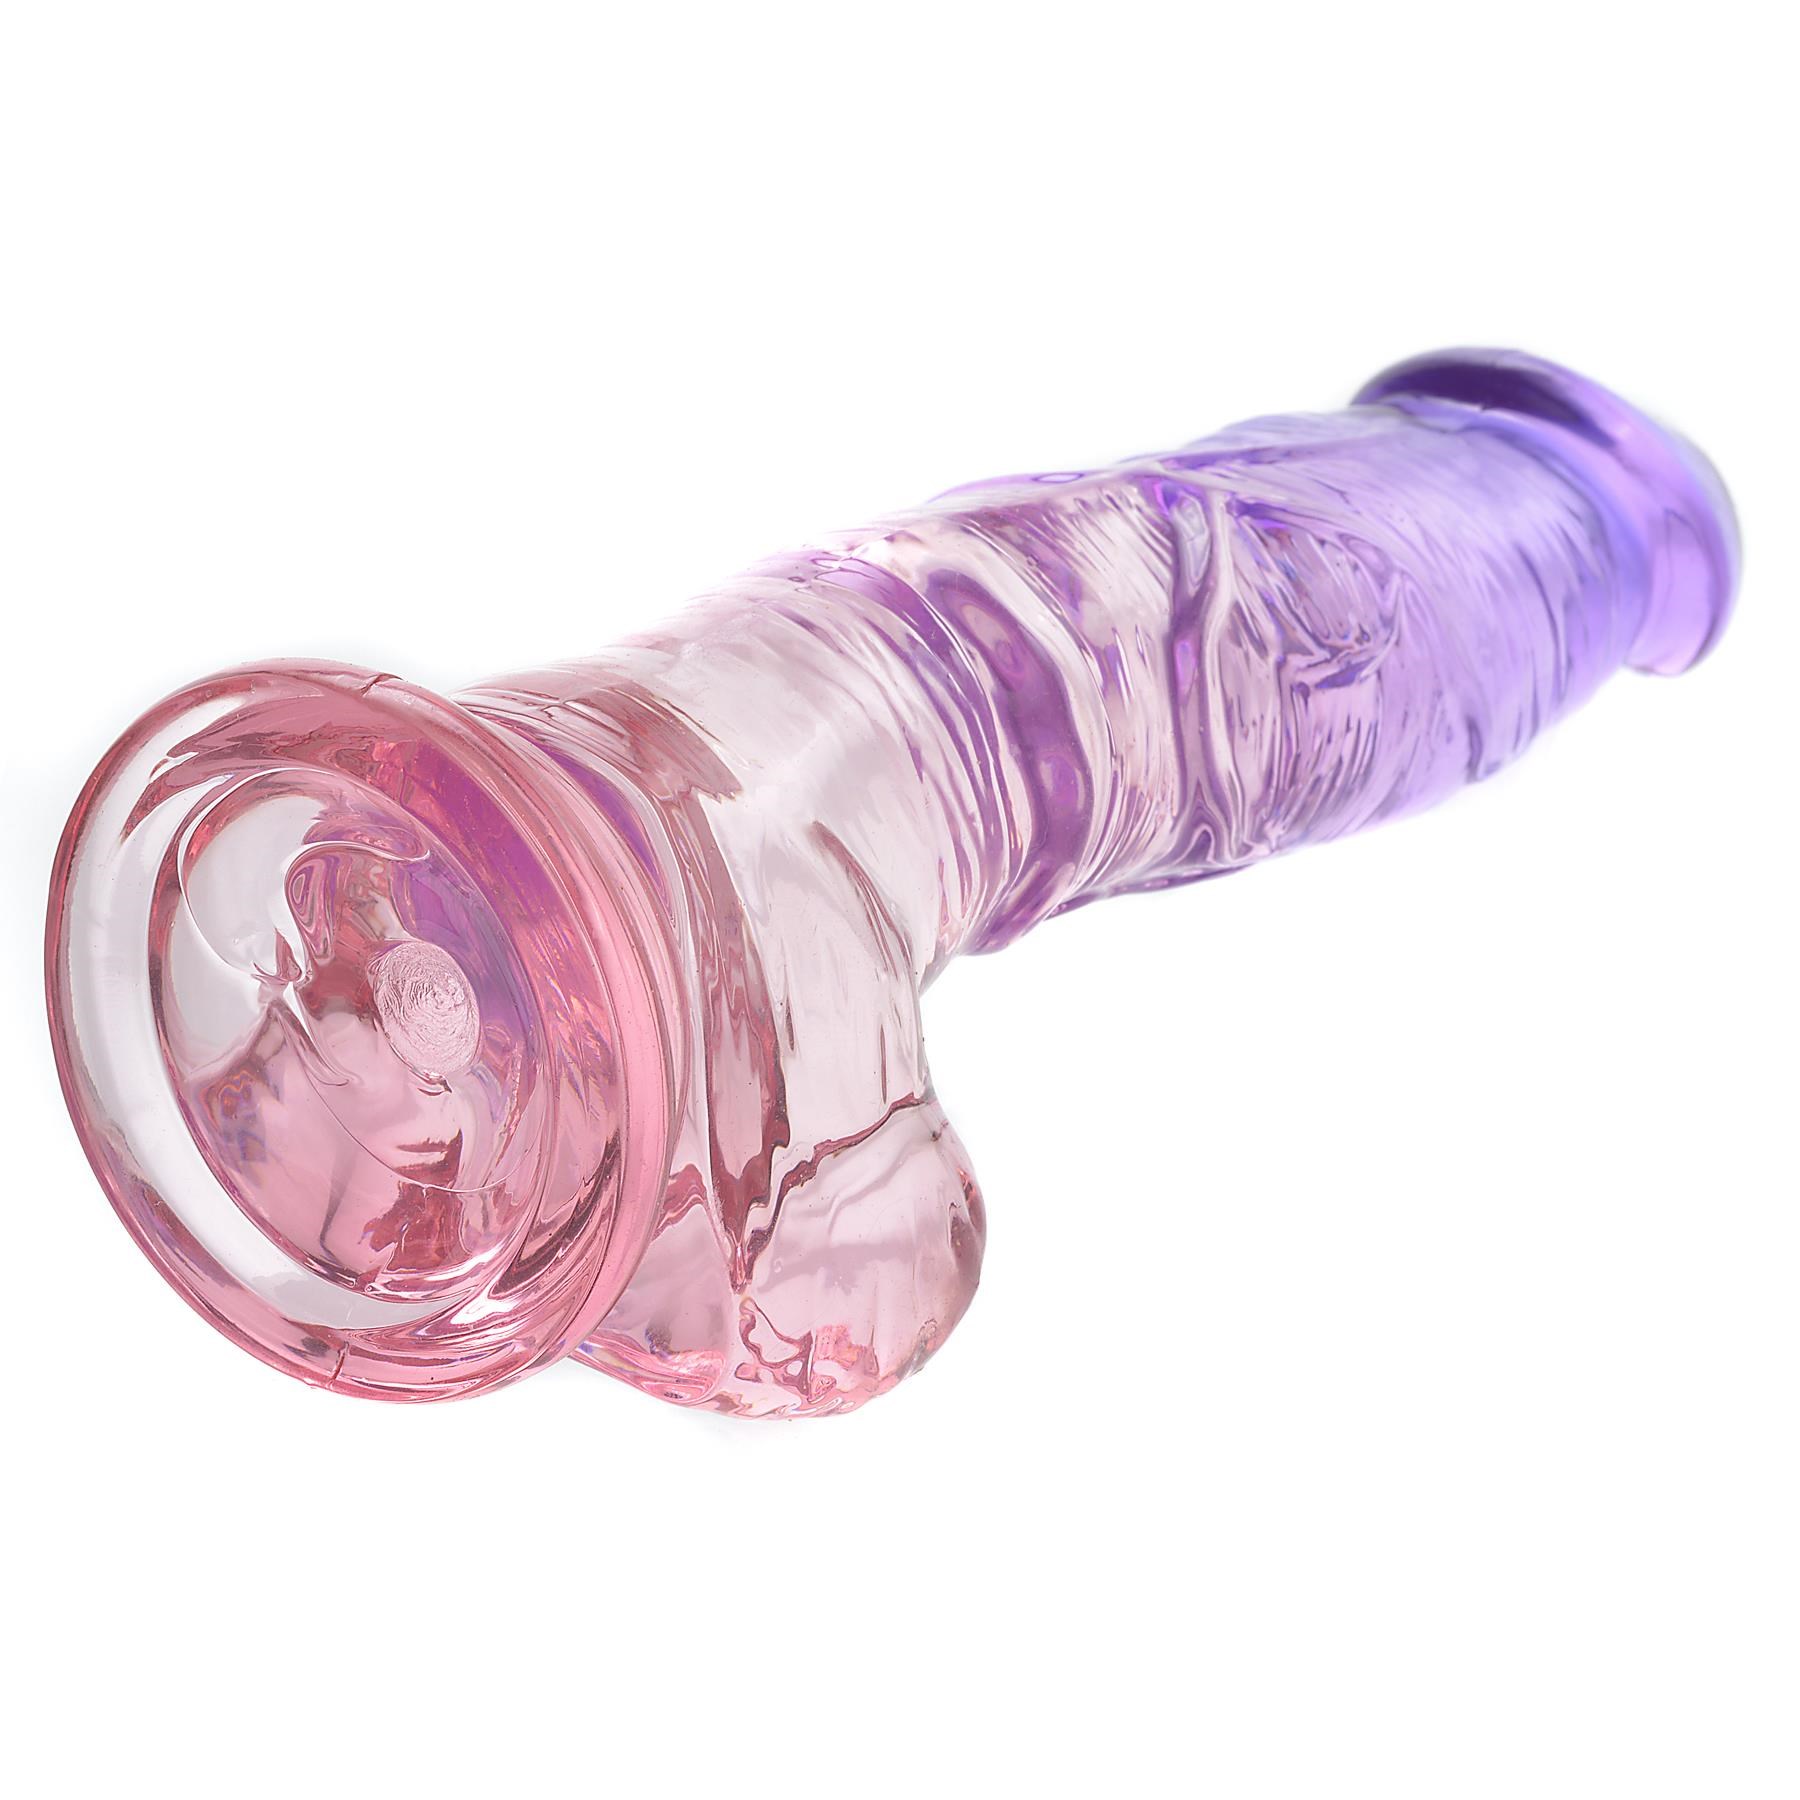 Adam & Eve Sunset Dreams Dildo - Product Showing Showing Suction Cup